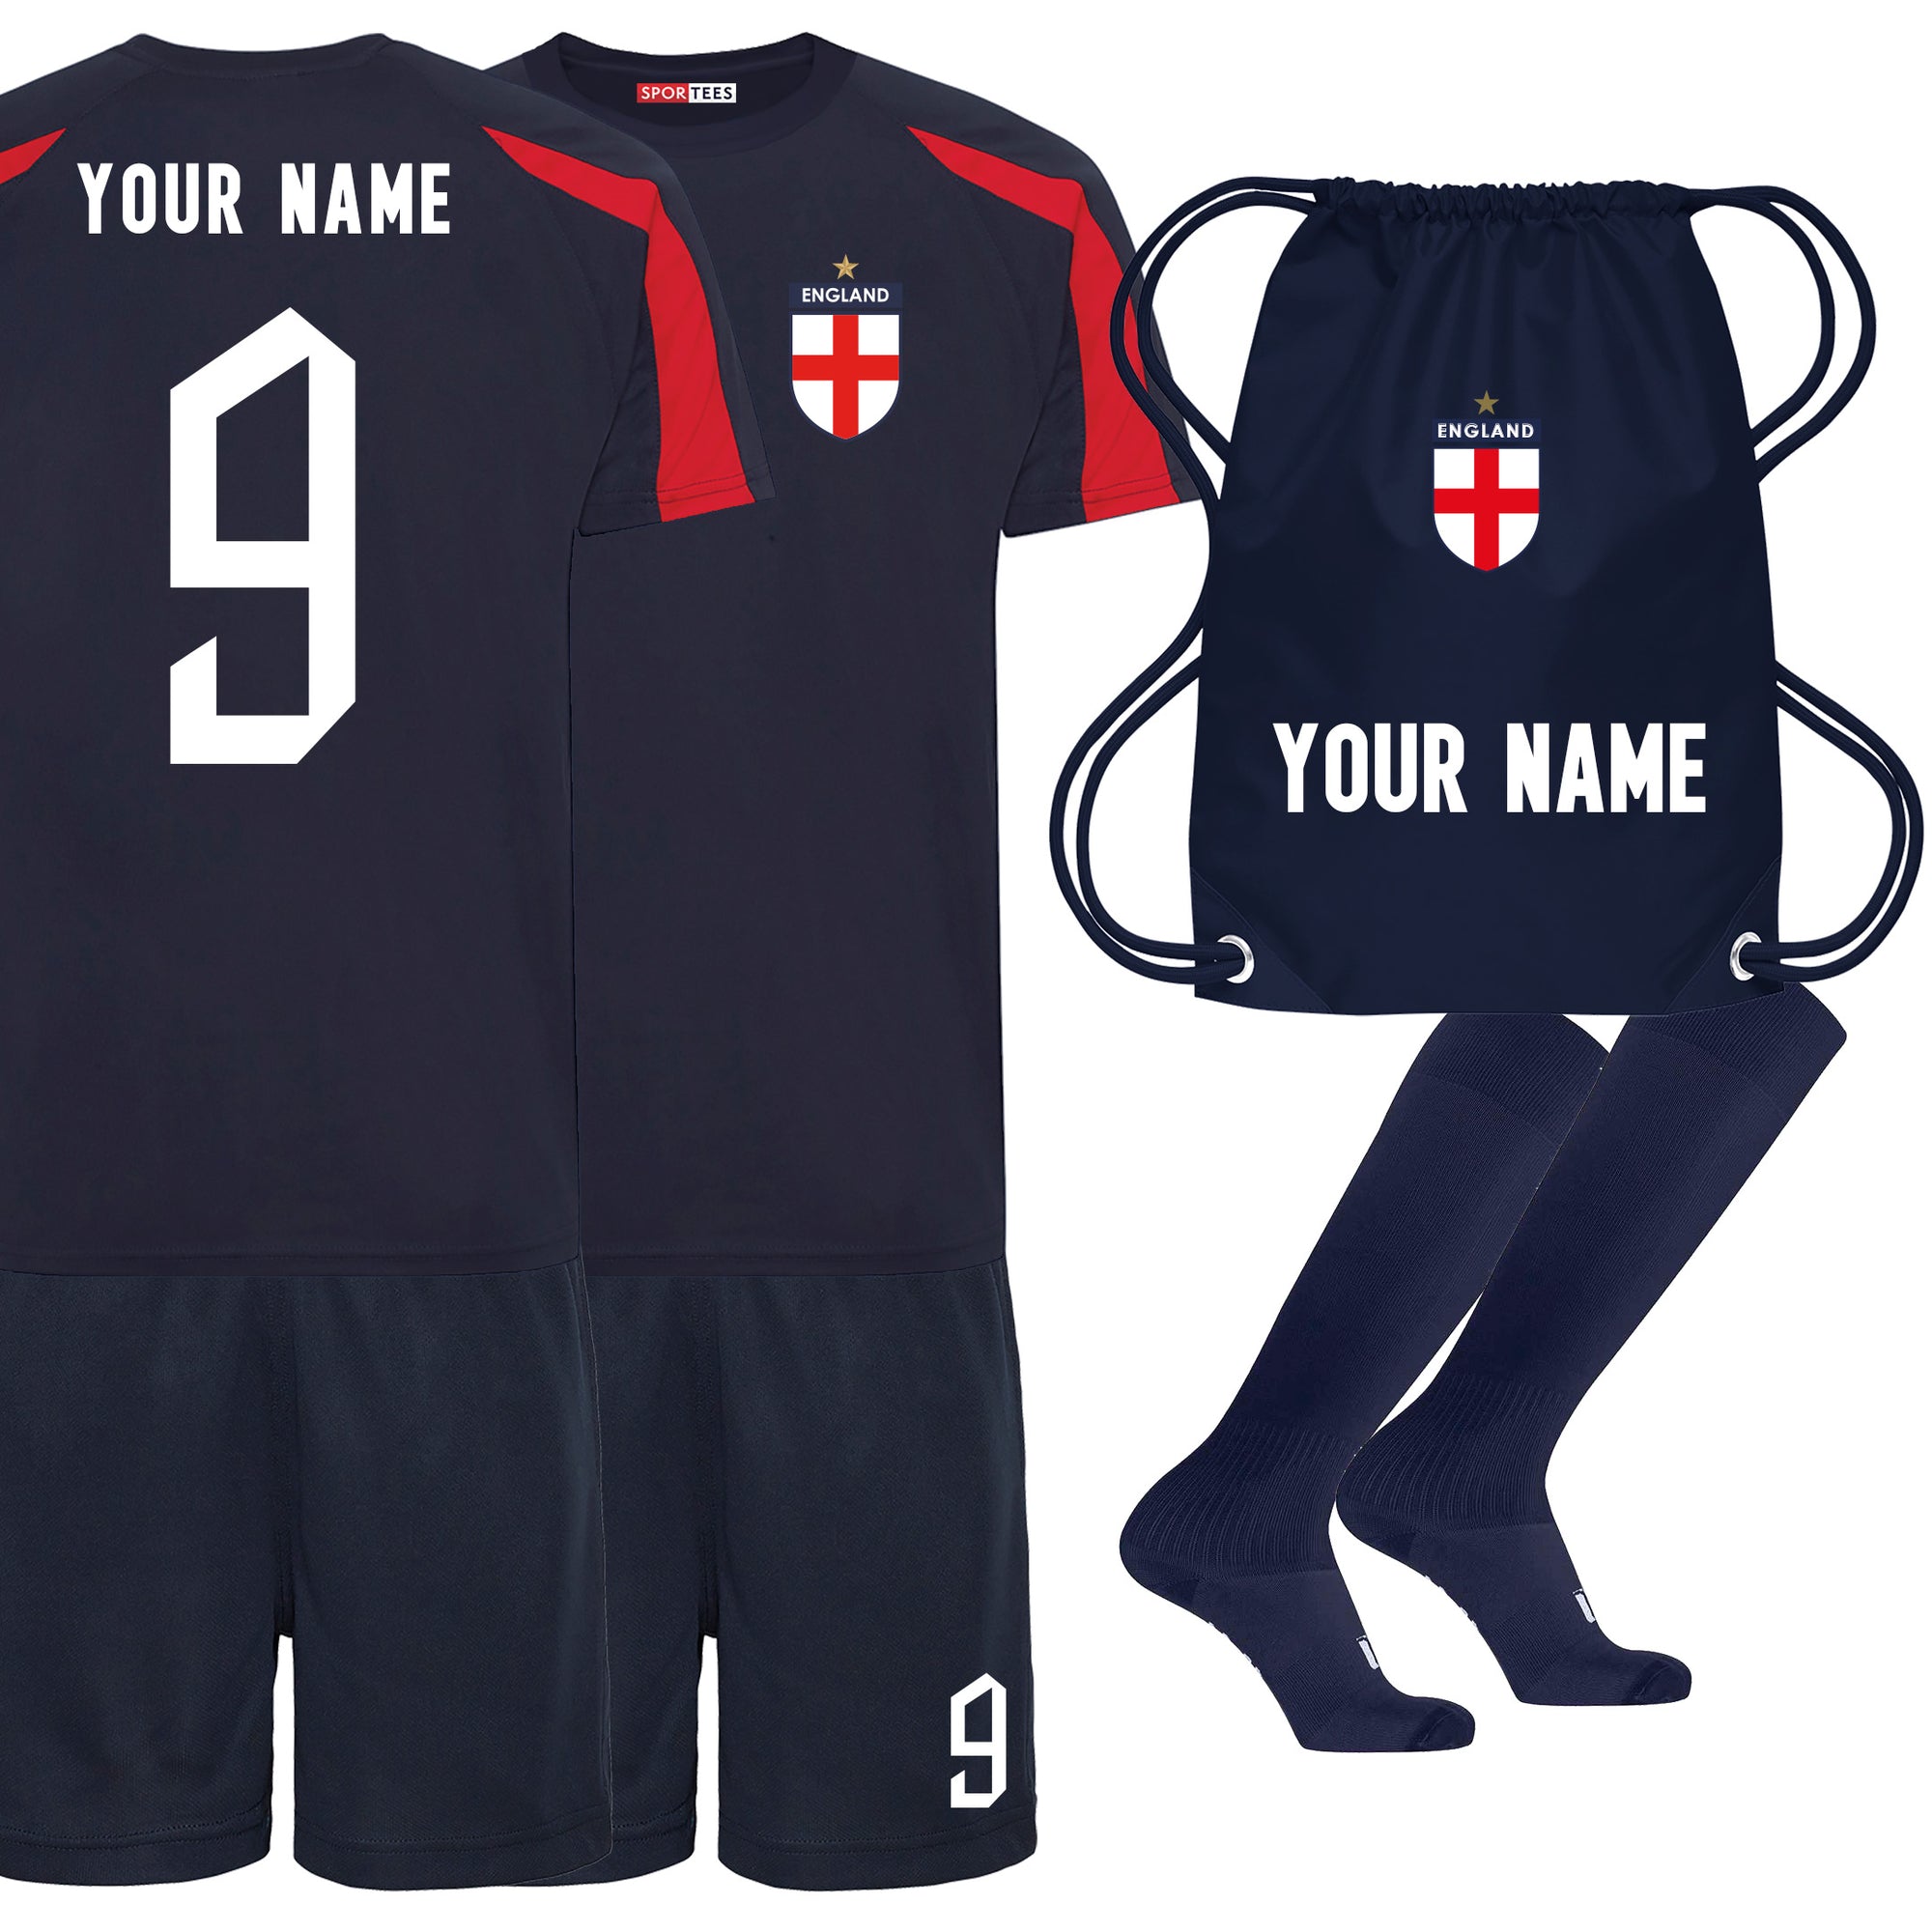 England Style Personalised Contrast Navy & Red Bundle With Socks & Bag